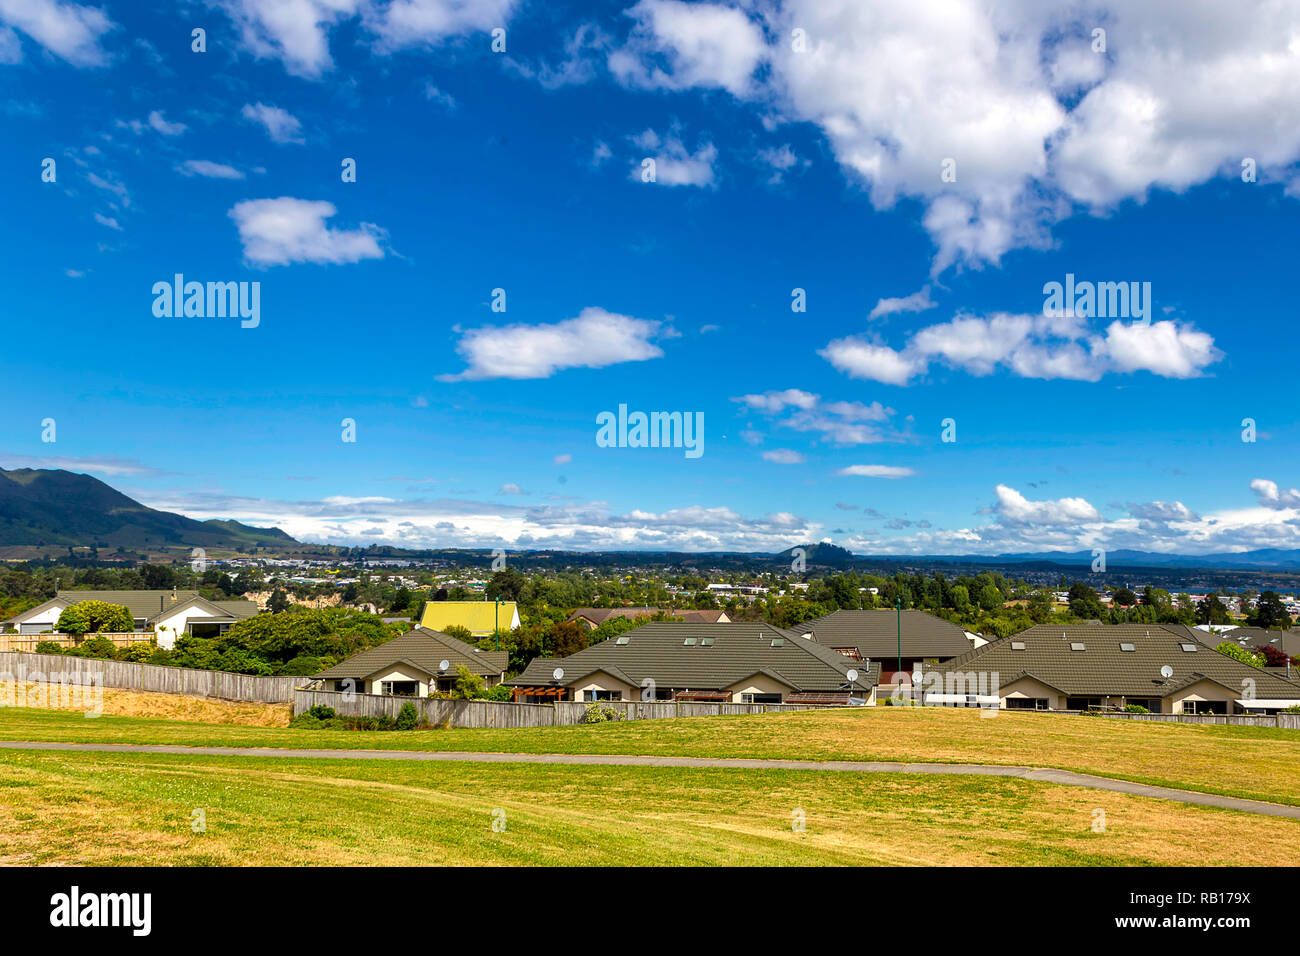 Green and yellow grass lawn, roofs of the houses and the view of Taupo town in New Zealand Stock Photo